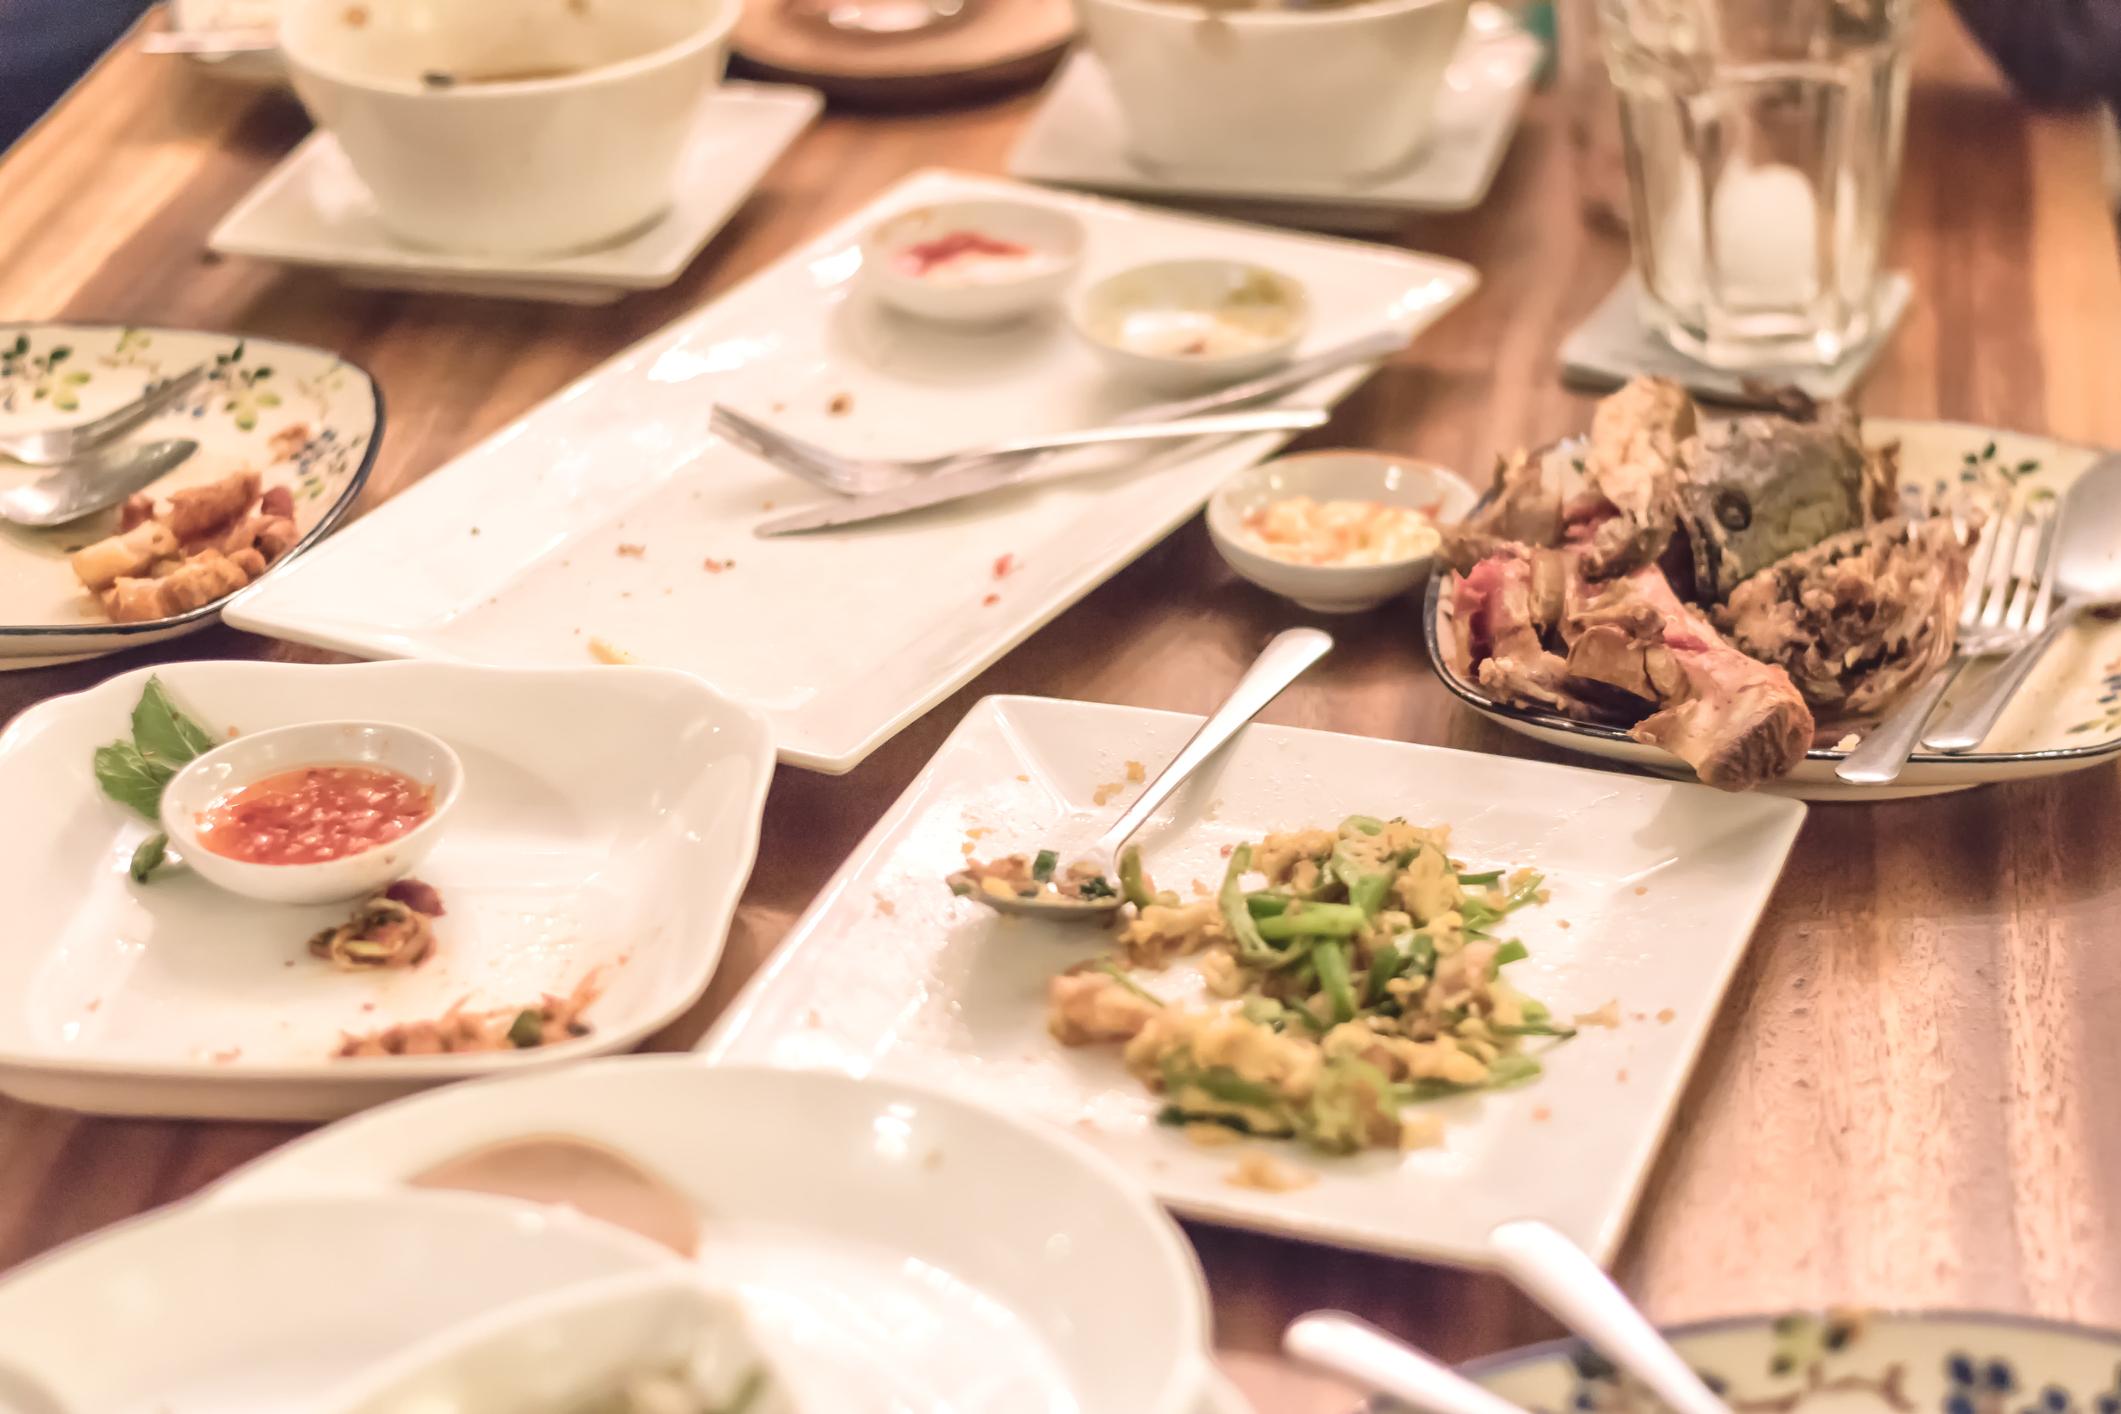 Buffet Horror Stories That Will Make You Never Want to Eat at One Again